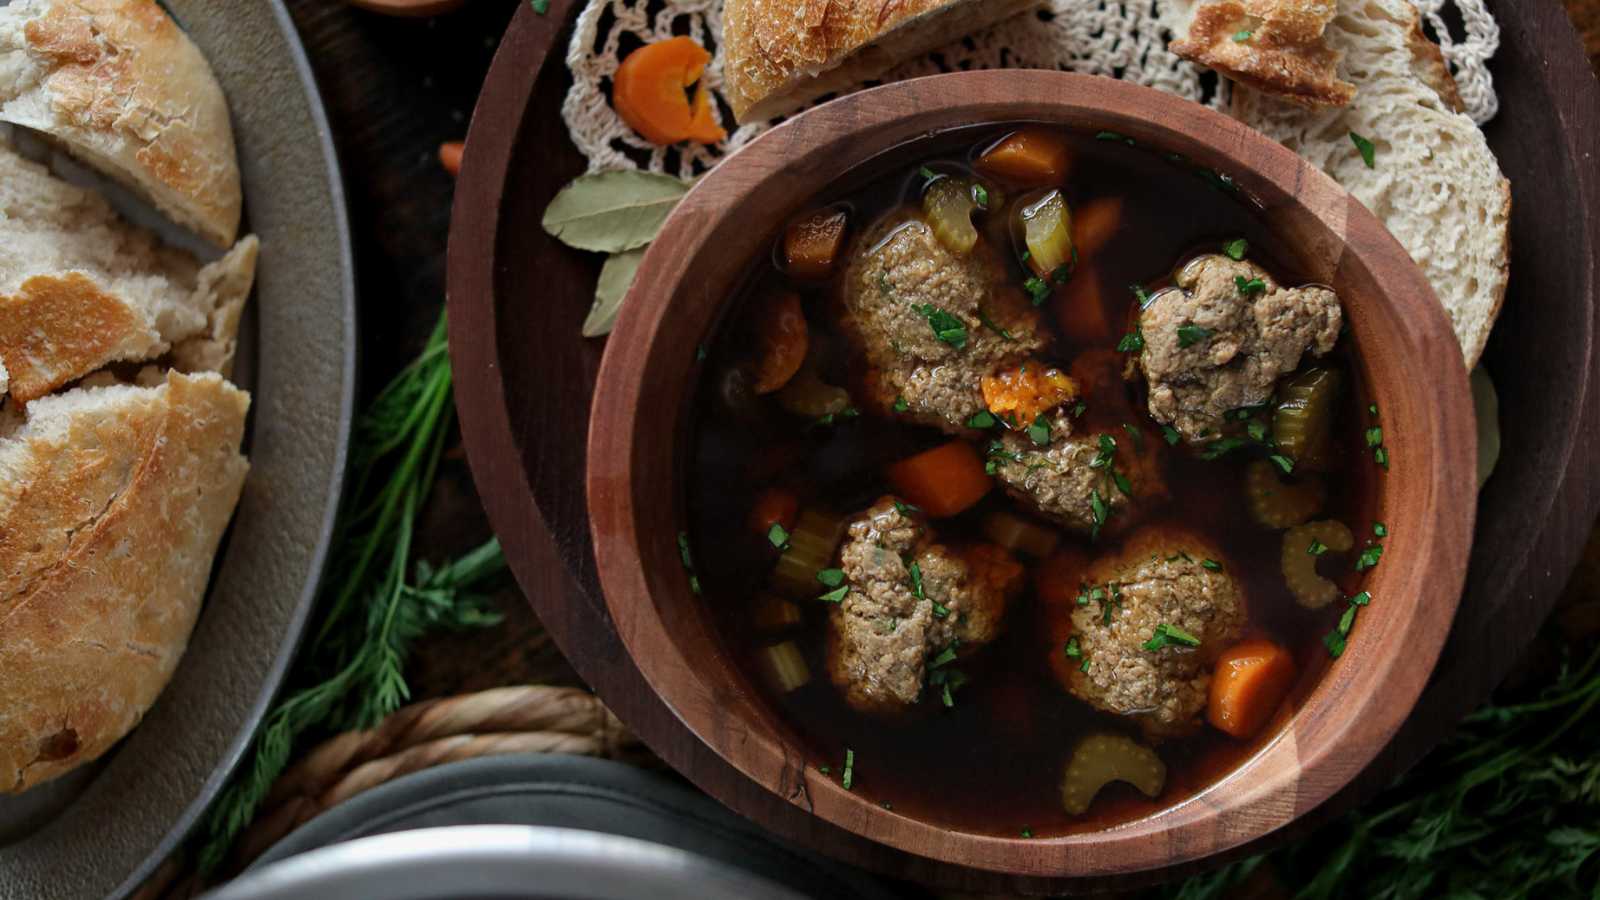 A wooden bowl full of liver dumplings floating in a beef based broth with vegetables.